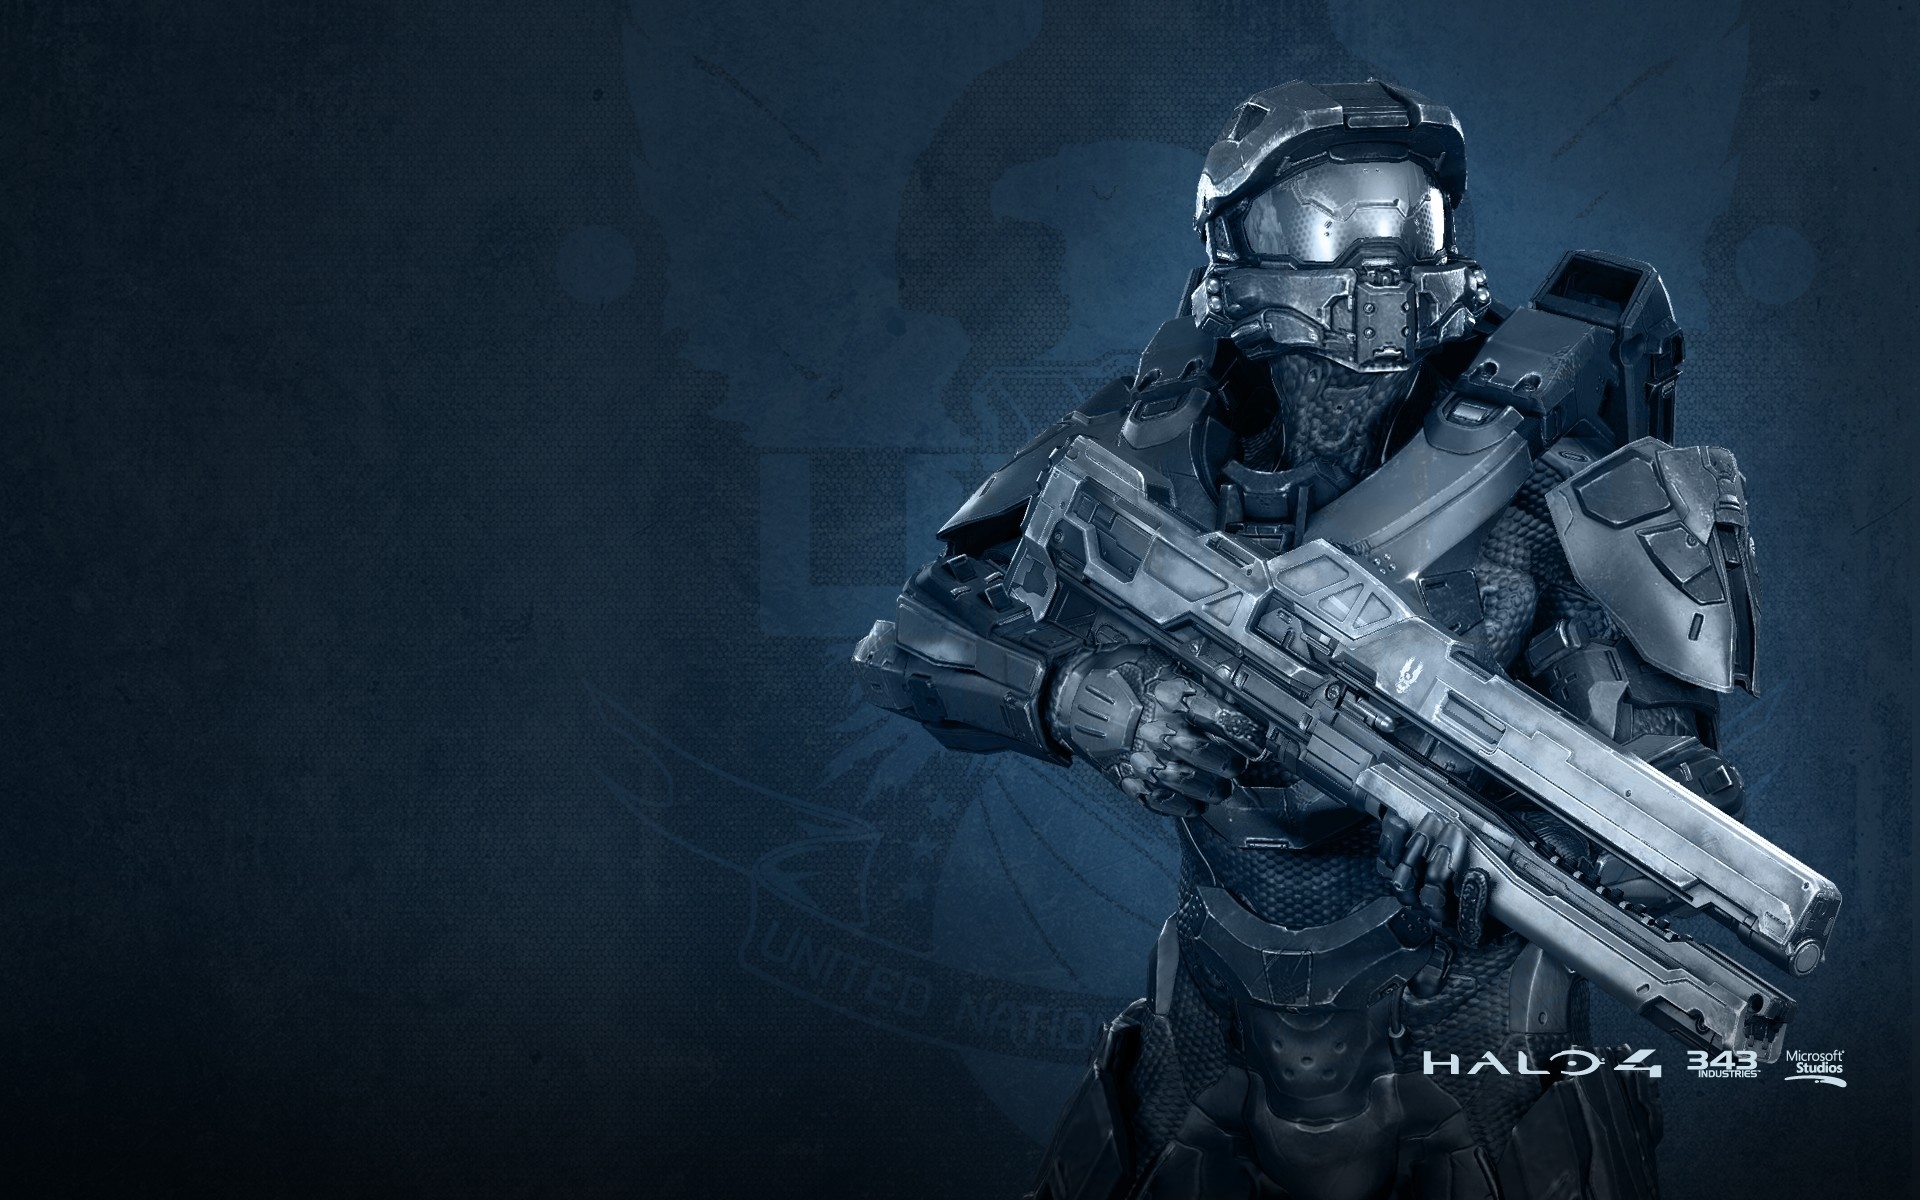 Free photo Armored robot with a weapon from the game halo 4